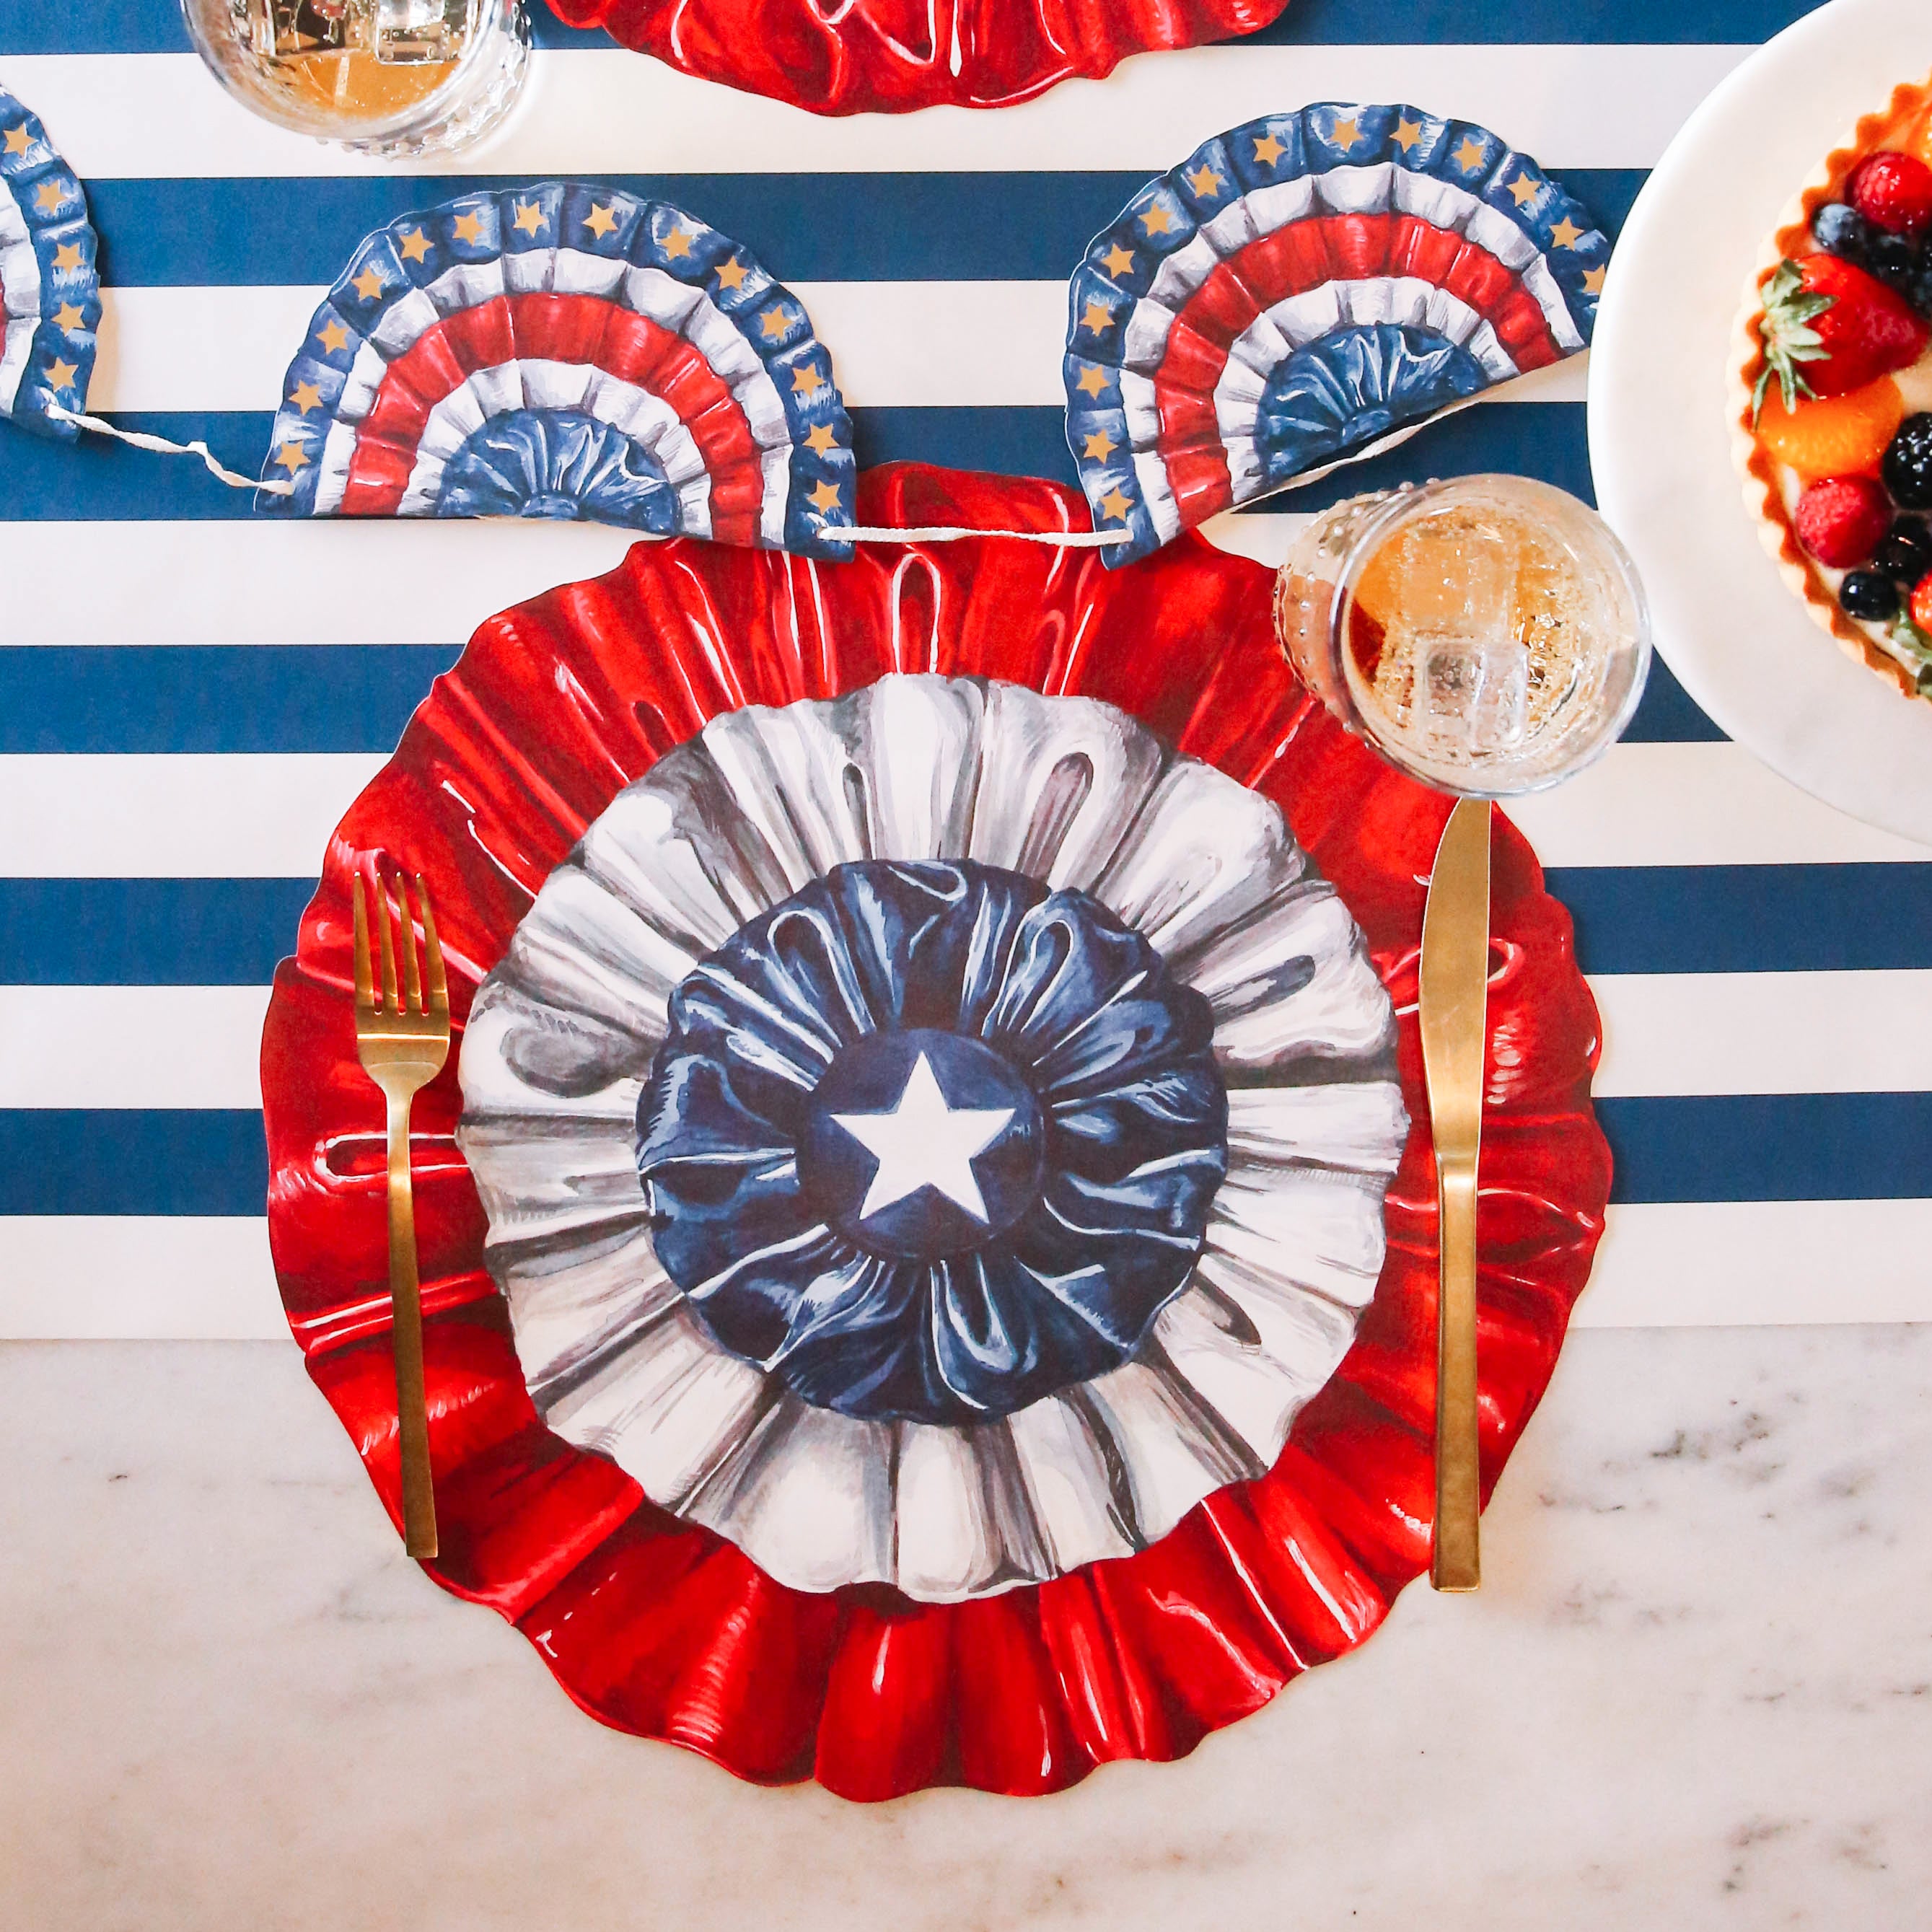 Pack of 12 Hester &amp; Cook Die-cut Star-Spangled Placemats for 4th of July celebration.